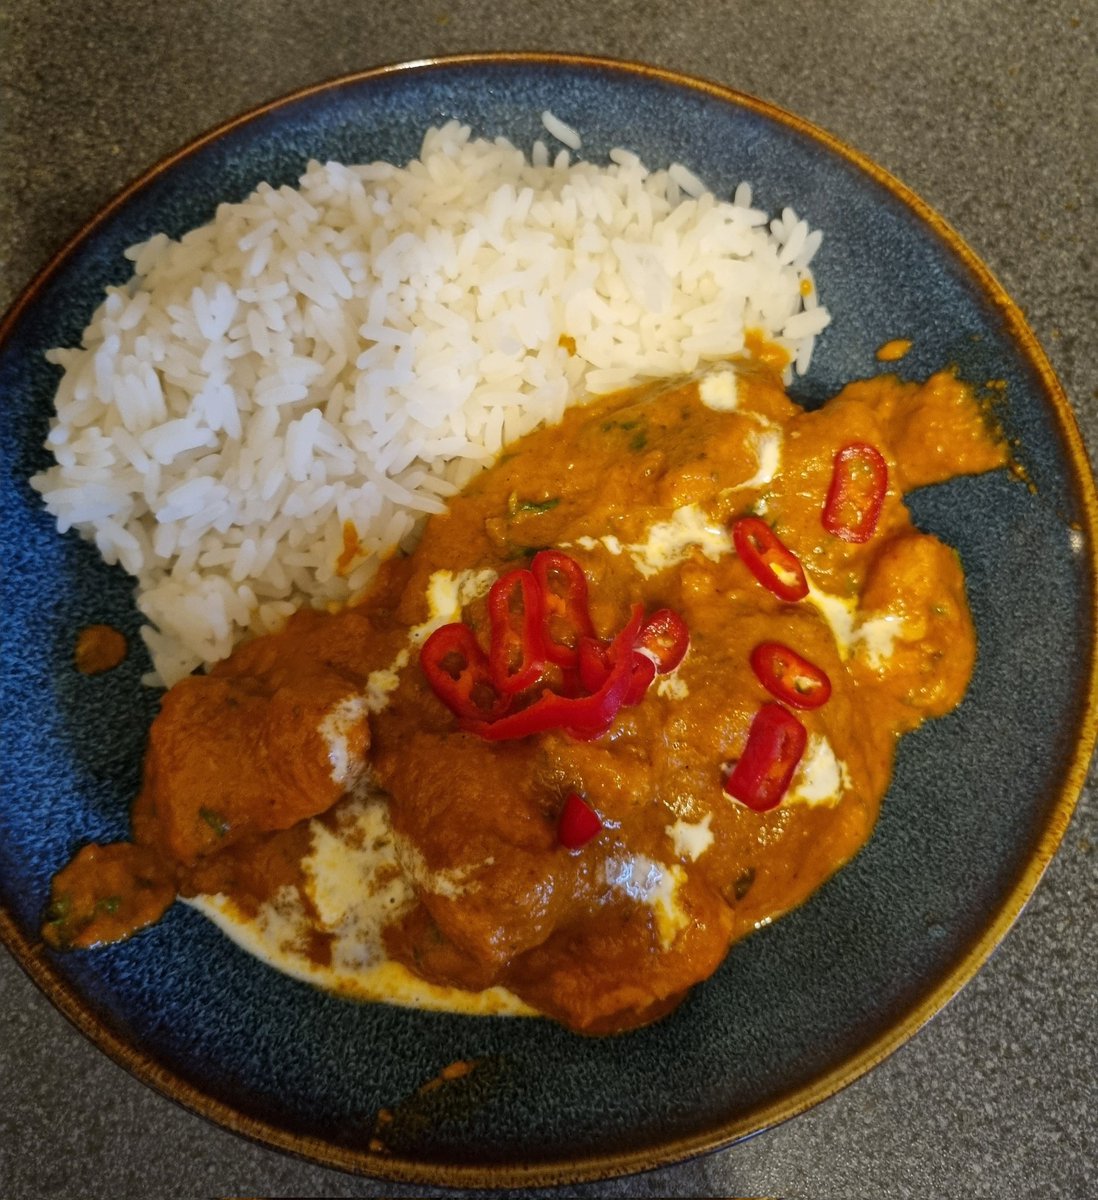 @MattCooperBites made the chicken chasni (without the red food colouring). Absolutely stunning, thank you. Can't wait for the next recipe to try.